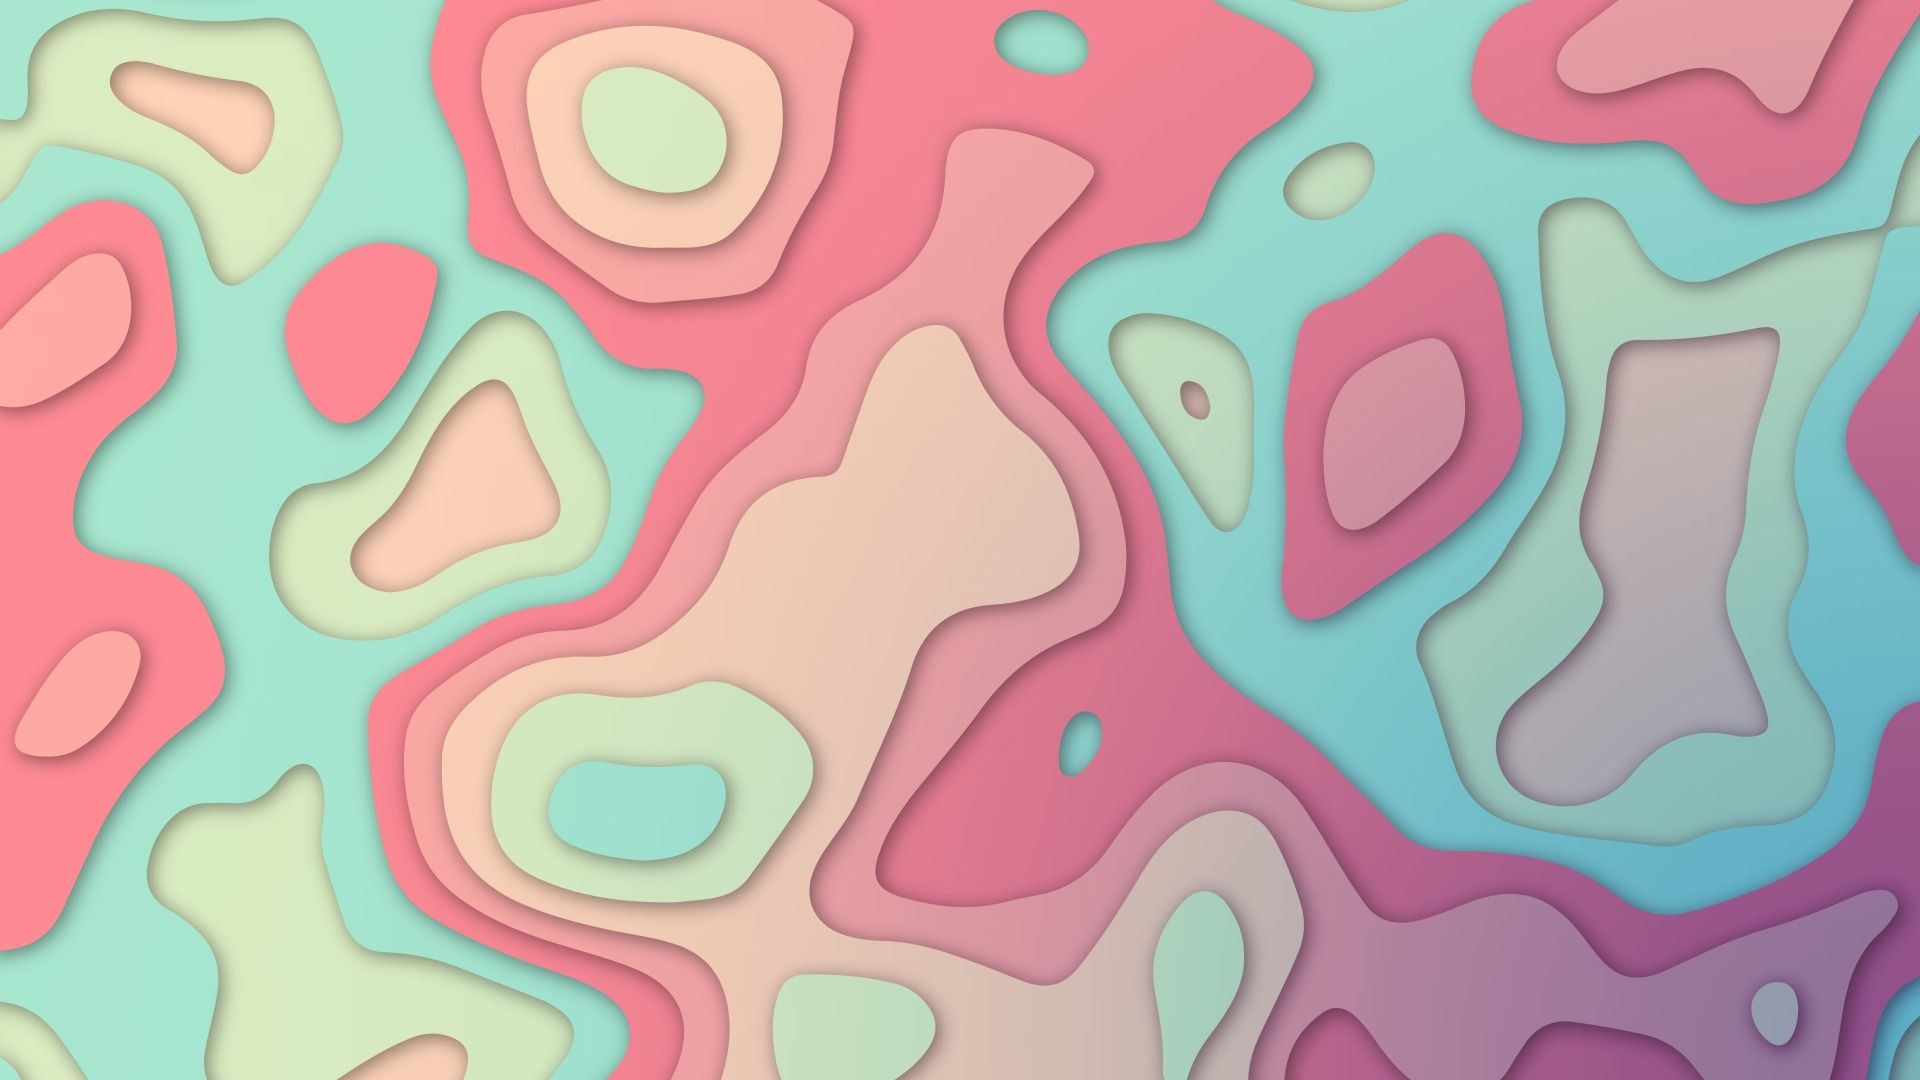 Pastel Slide Elevation Colorful Abstract 1080P Laptop